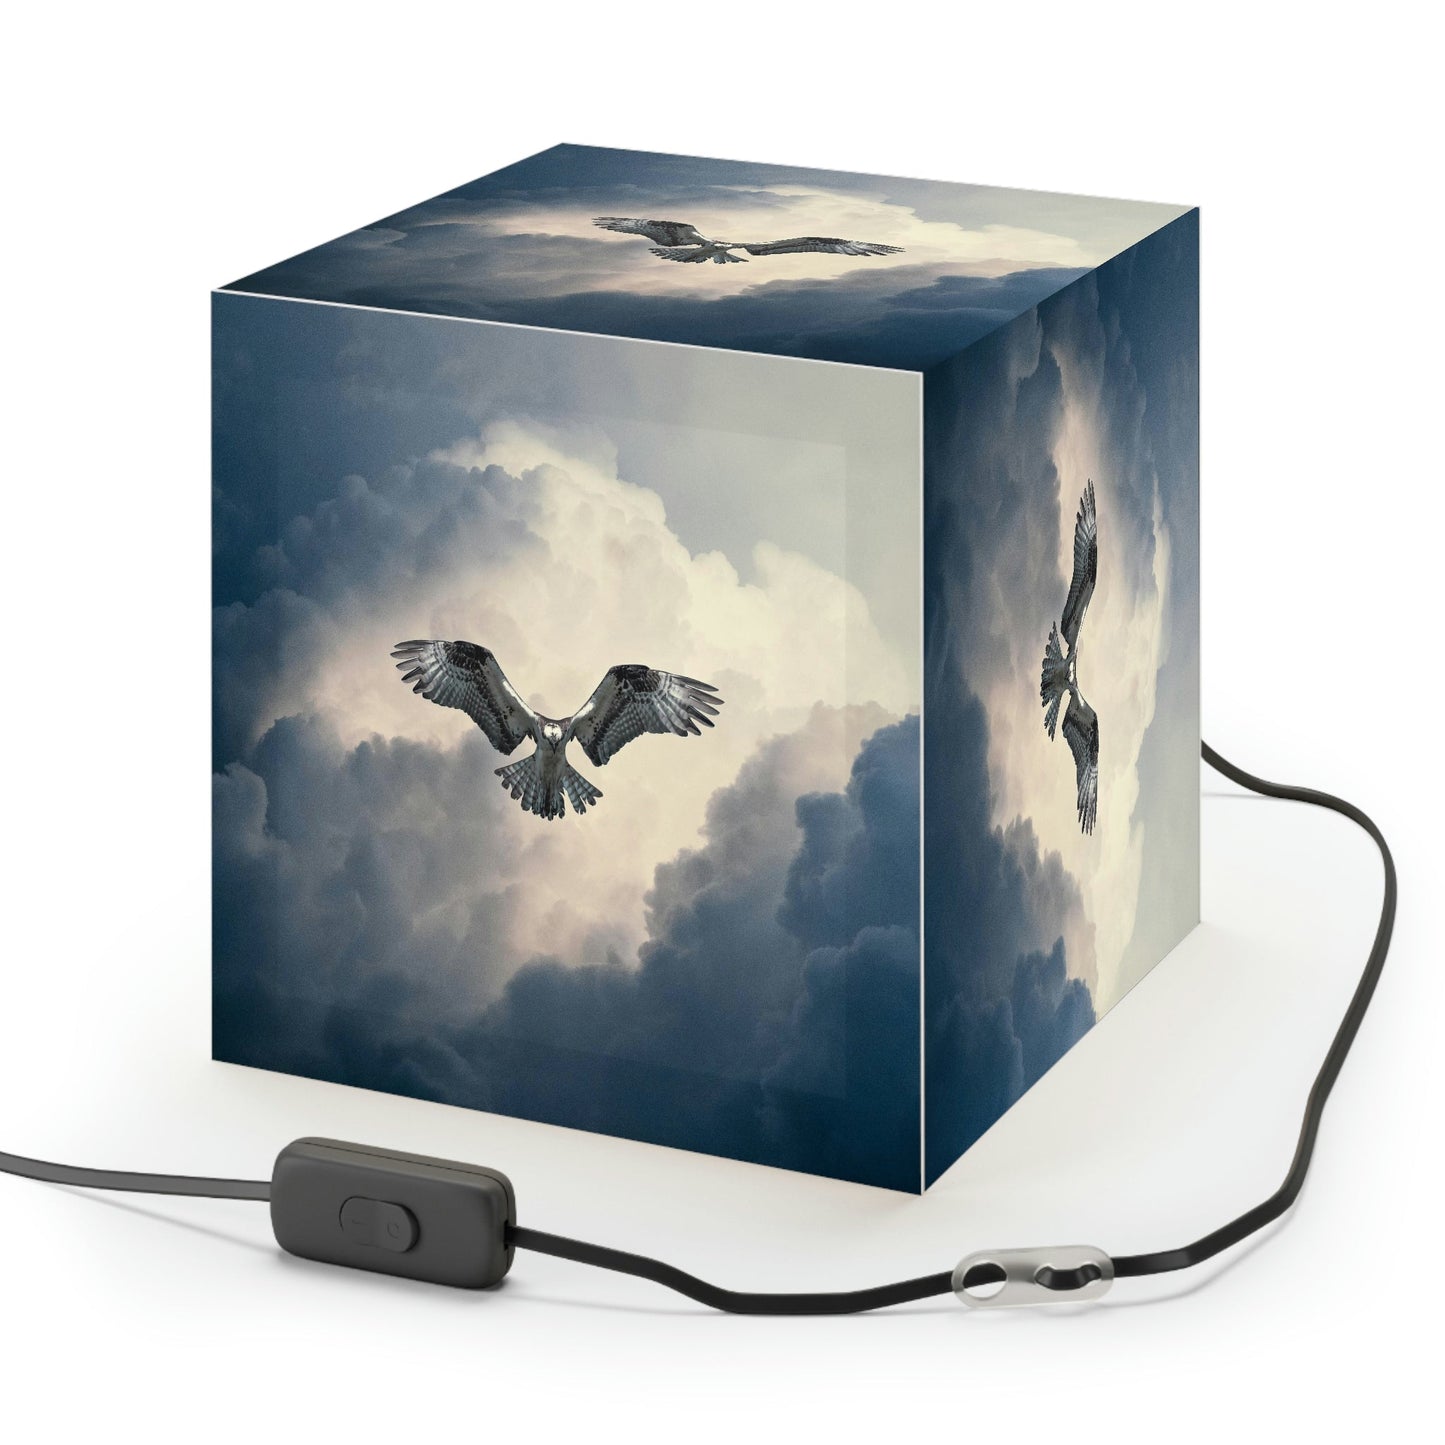 Osprey Light Cube Lamp - Perfect for the birdwatcher in your family